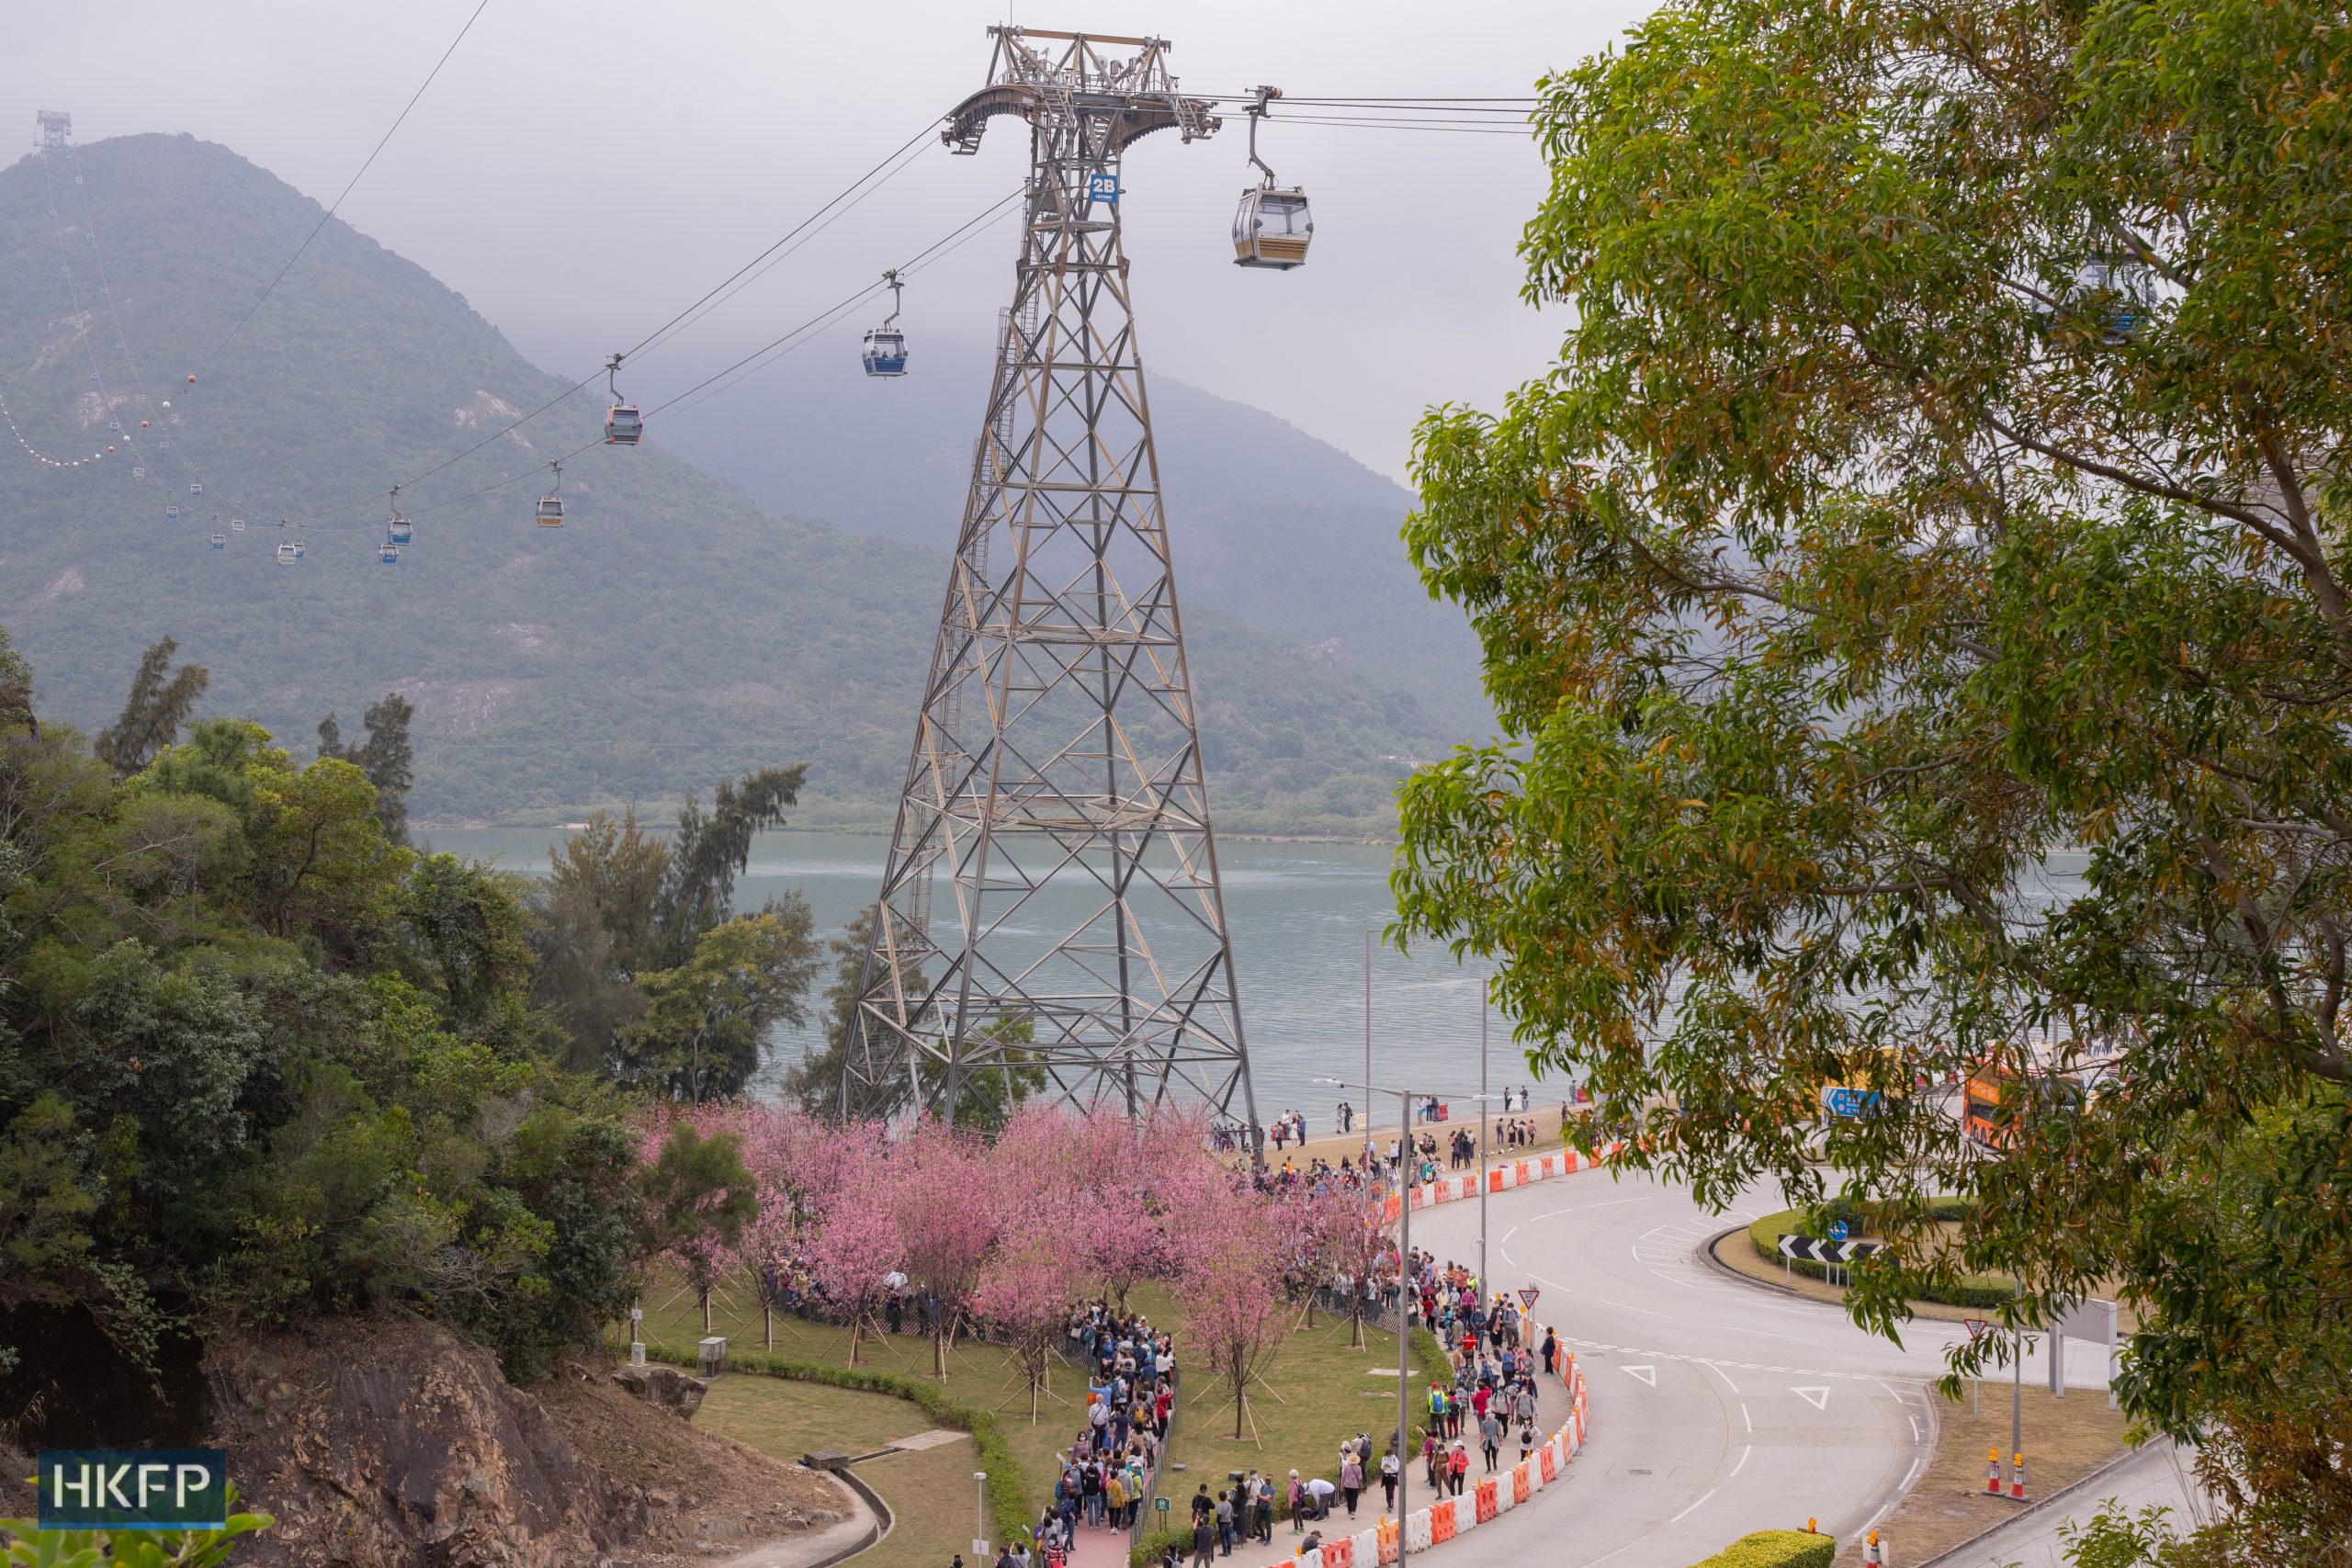 Hongkongers flock to see blooming cherry blossom trees around Chek Lap Kok South on February 10, 2023. Photo: Kyle Lam/HKFP.